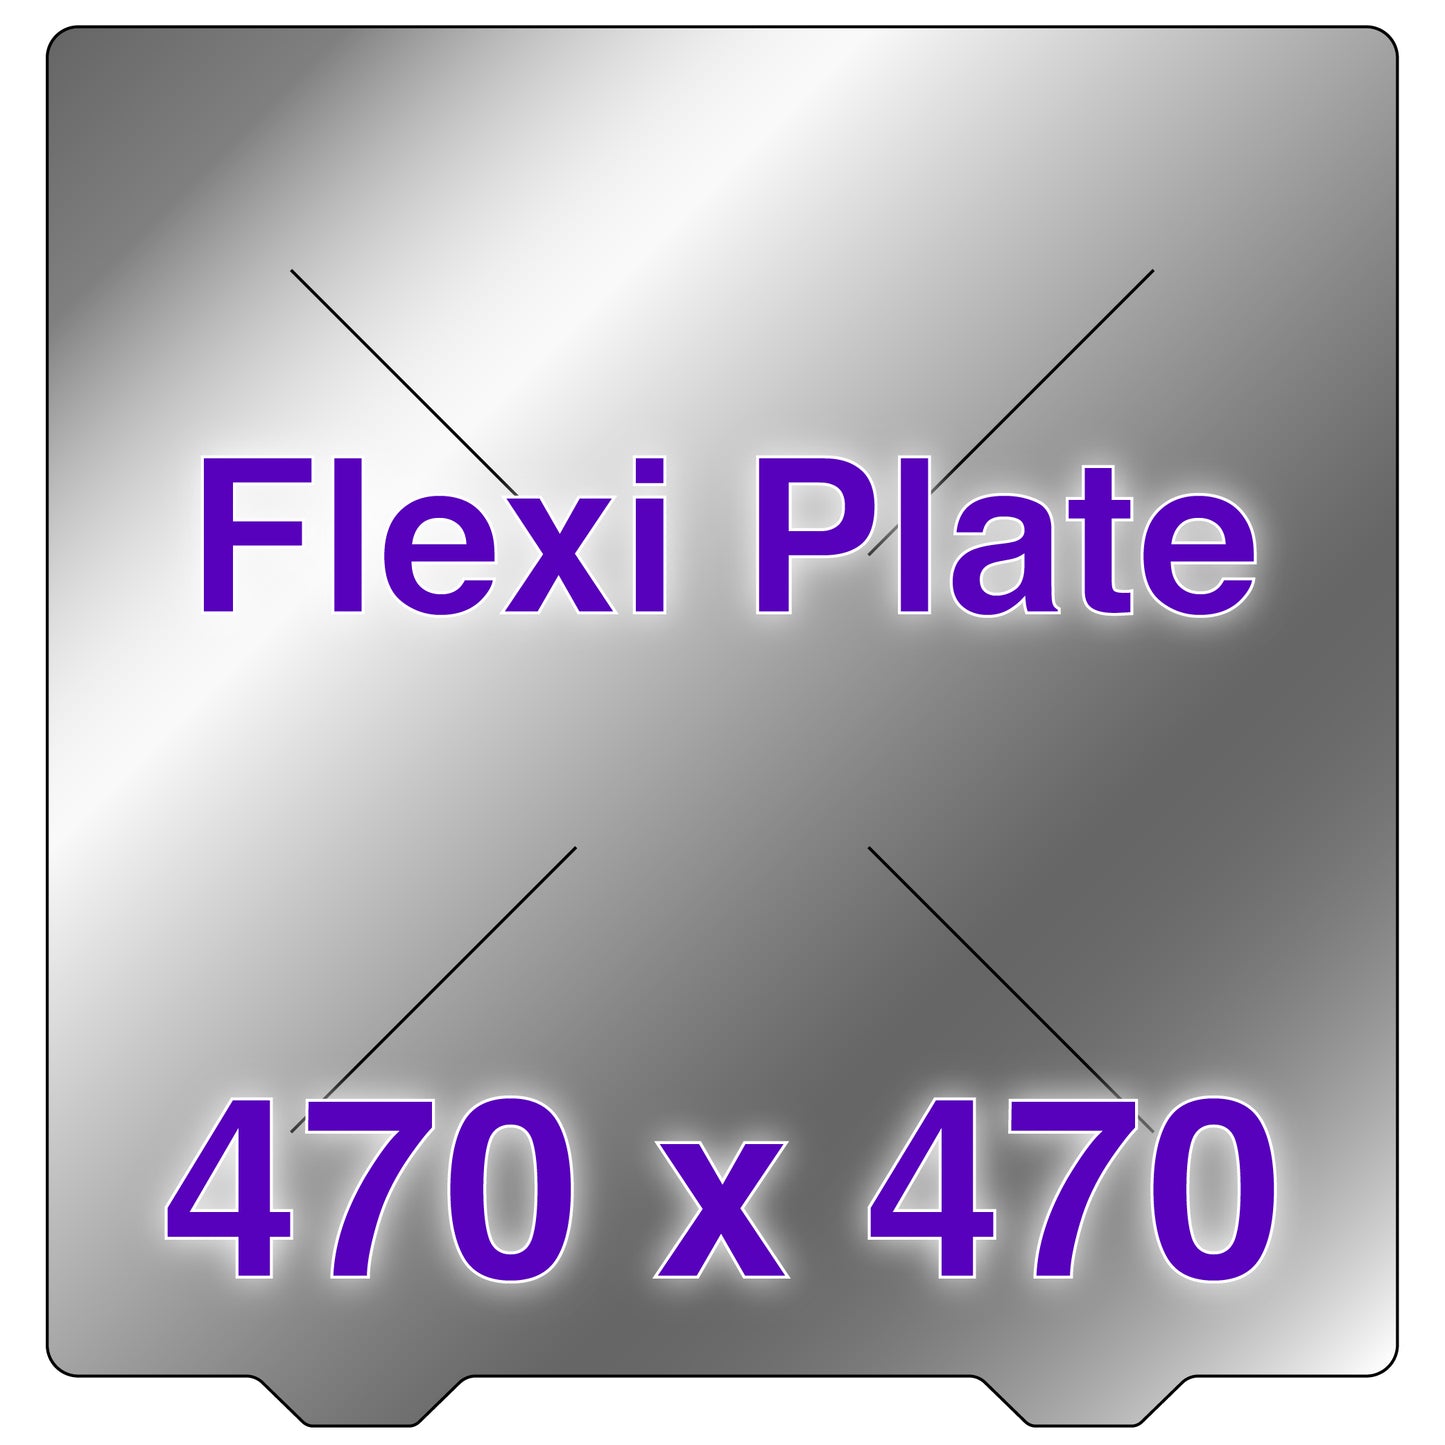 Flexi Plate with No Build Surface - 470 x 470